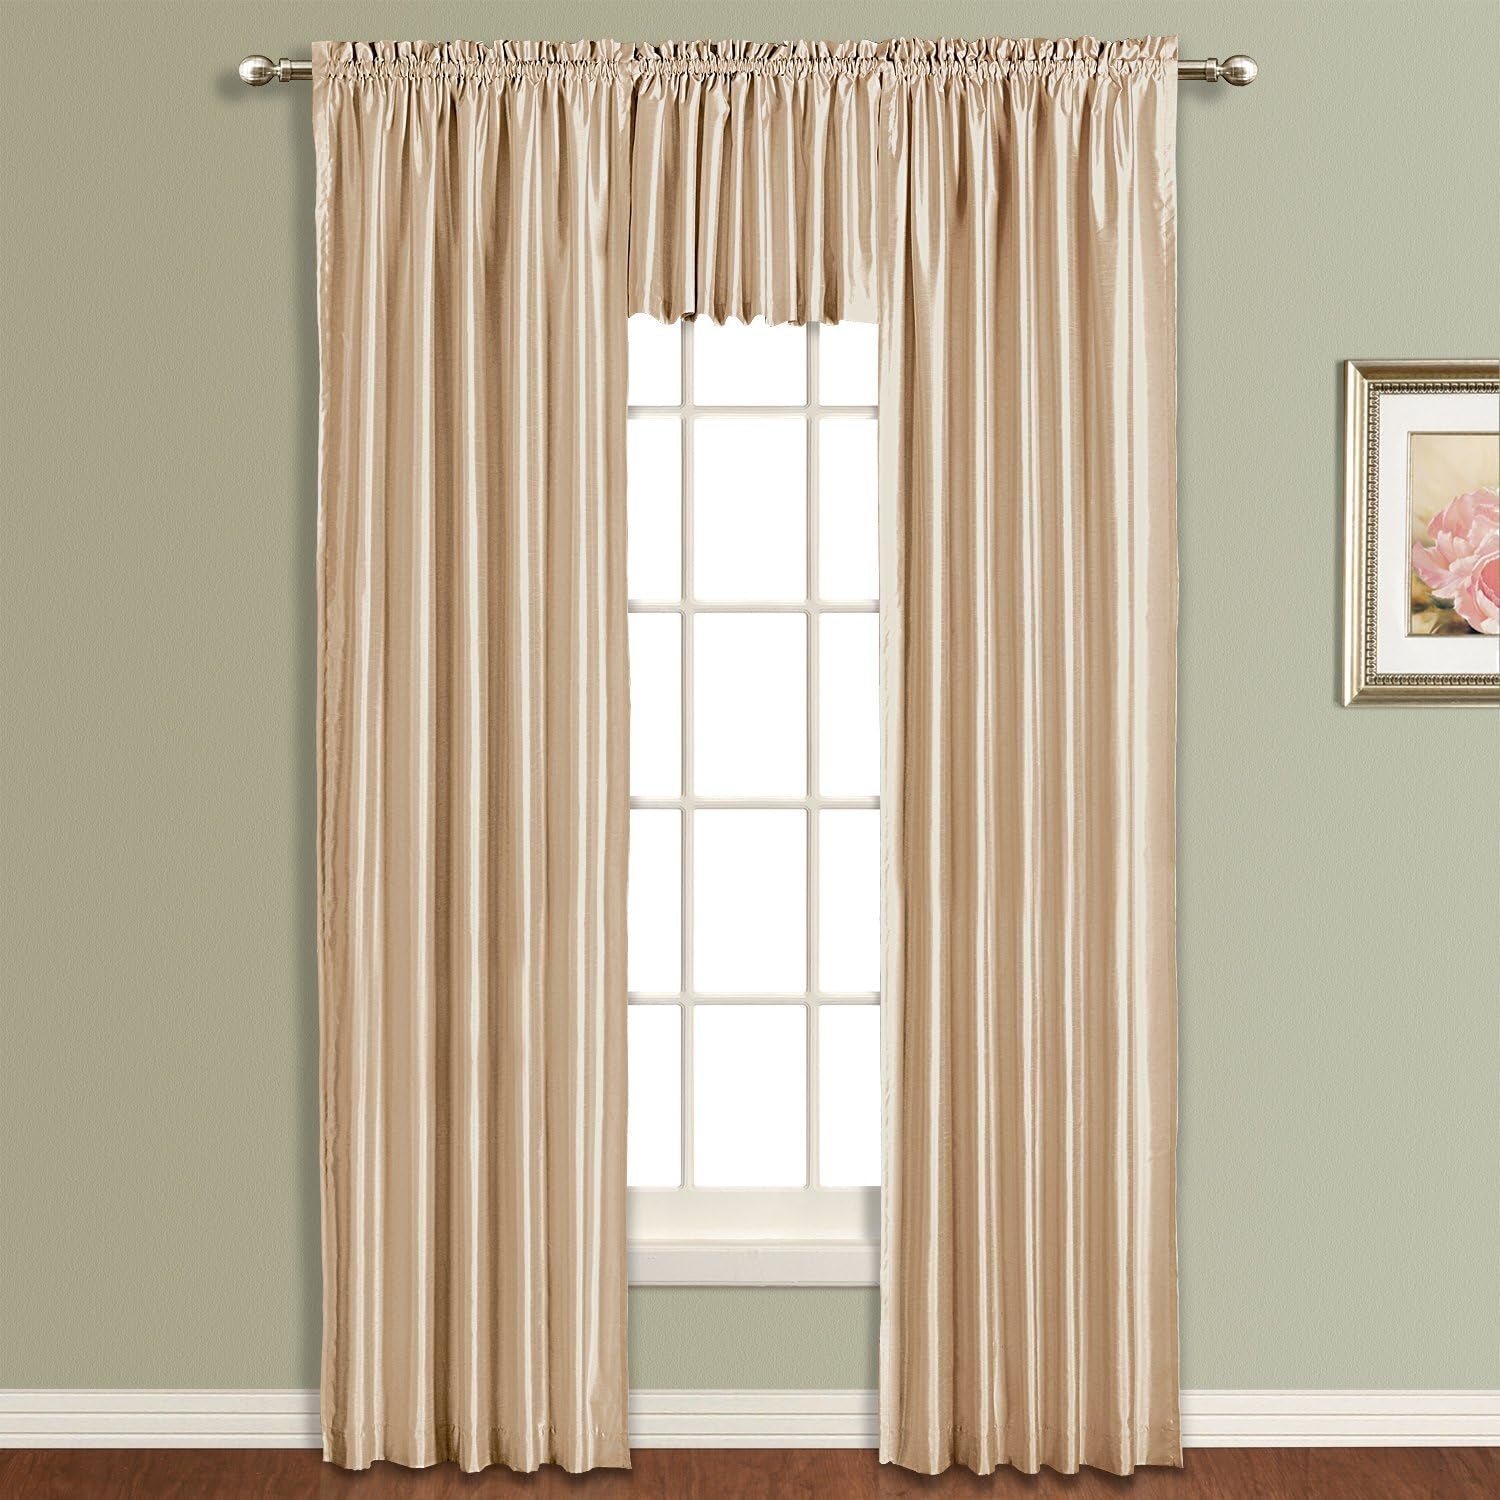 Kathryn Straight Window Treatment Valance, 54-Inch by 16-Inch, Taupe